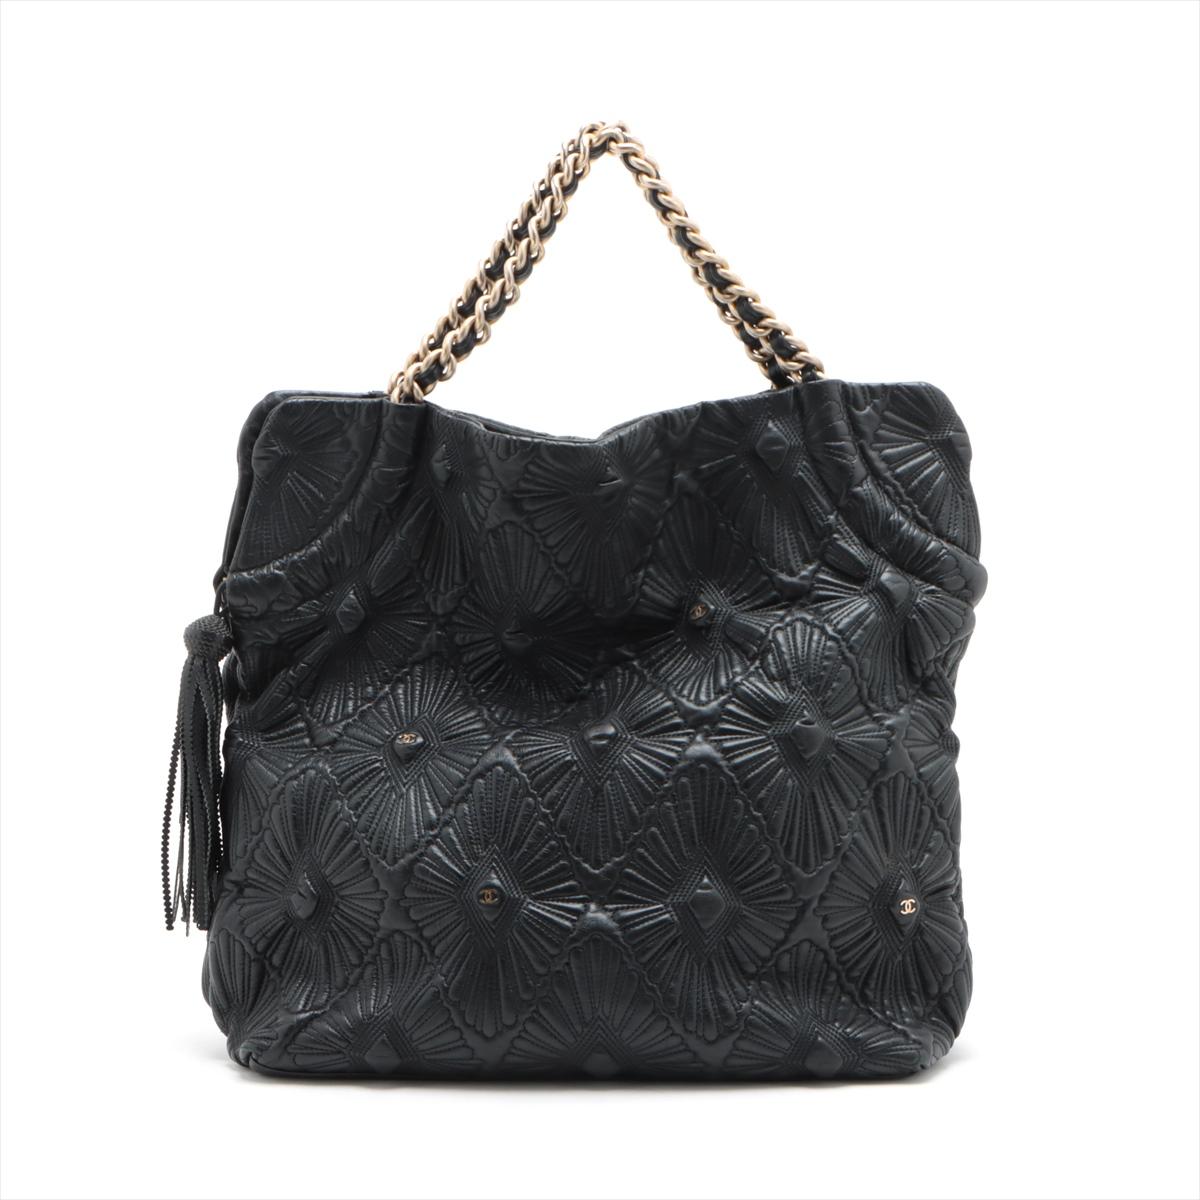 The Chanel CC Logo Leather Chain Tassel Handbag in Black is a stunning embodiment of timeless elegance. Crafted from high-quality leather, the handbag features small iconic CC logo prominently displayed on the front like a button, a symbol of luxury